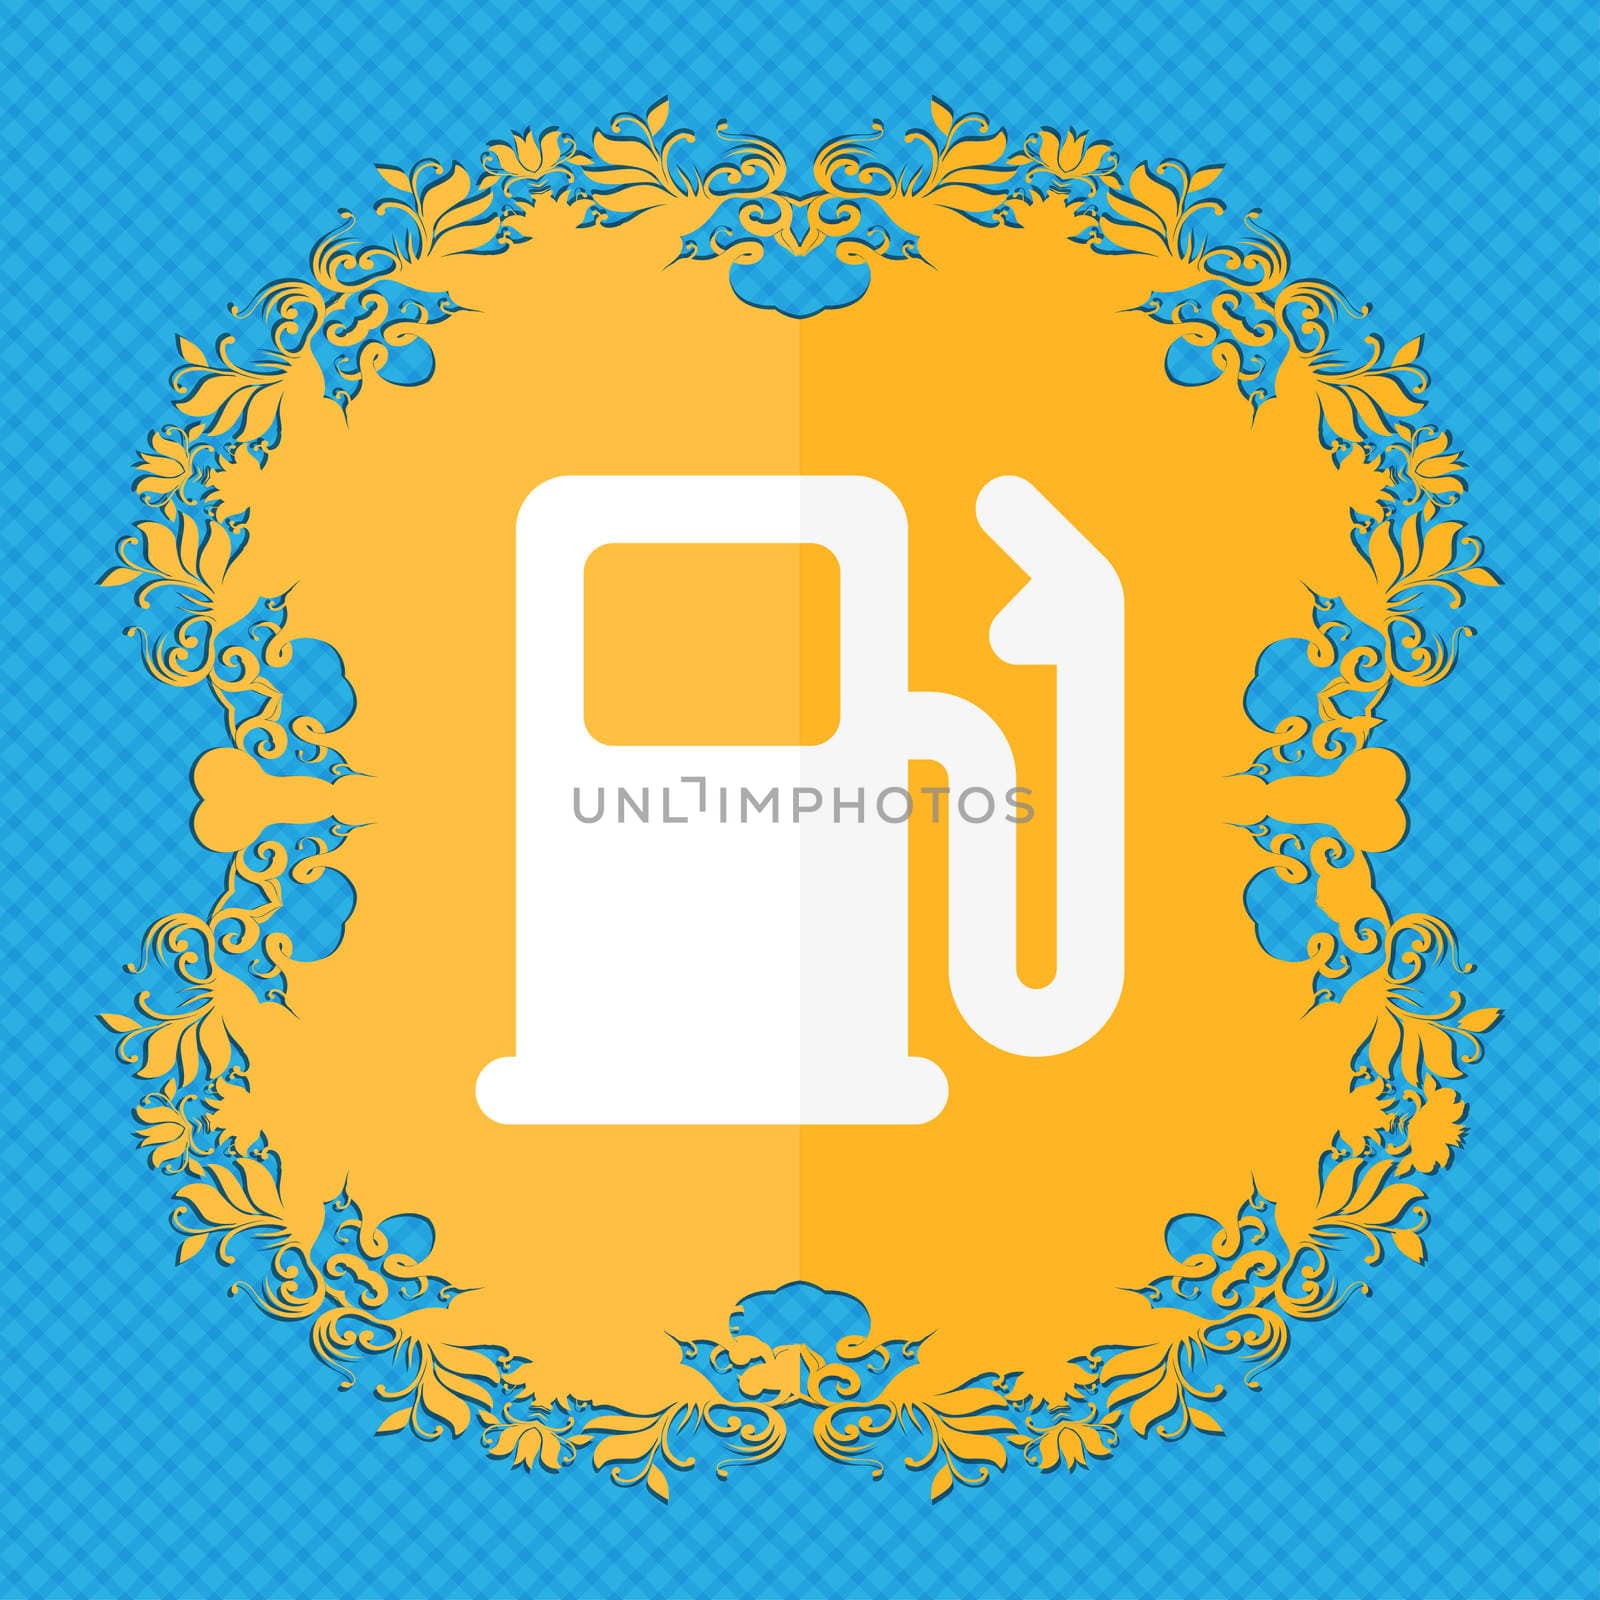 Petrol or Gas station, Car fuel . Floral flat design on a blue abstract background with place for your text. illustration